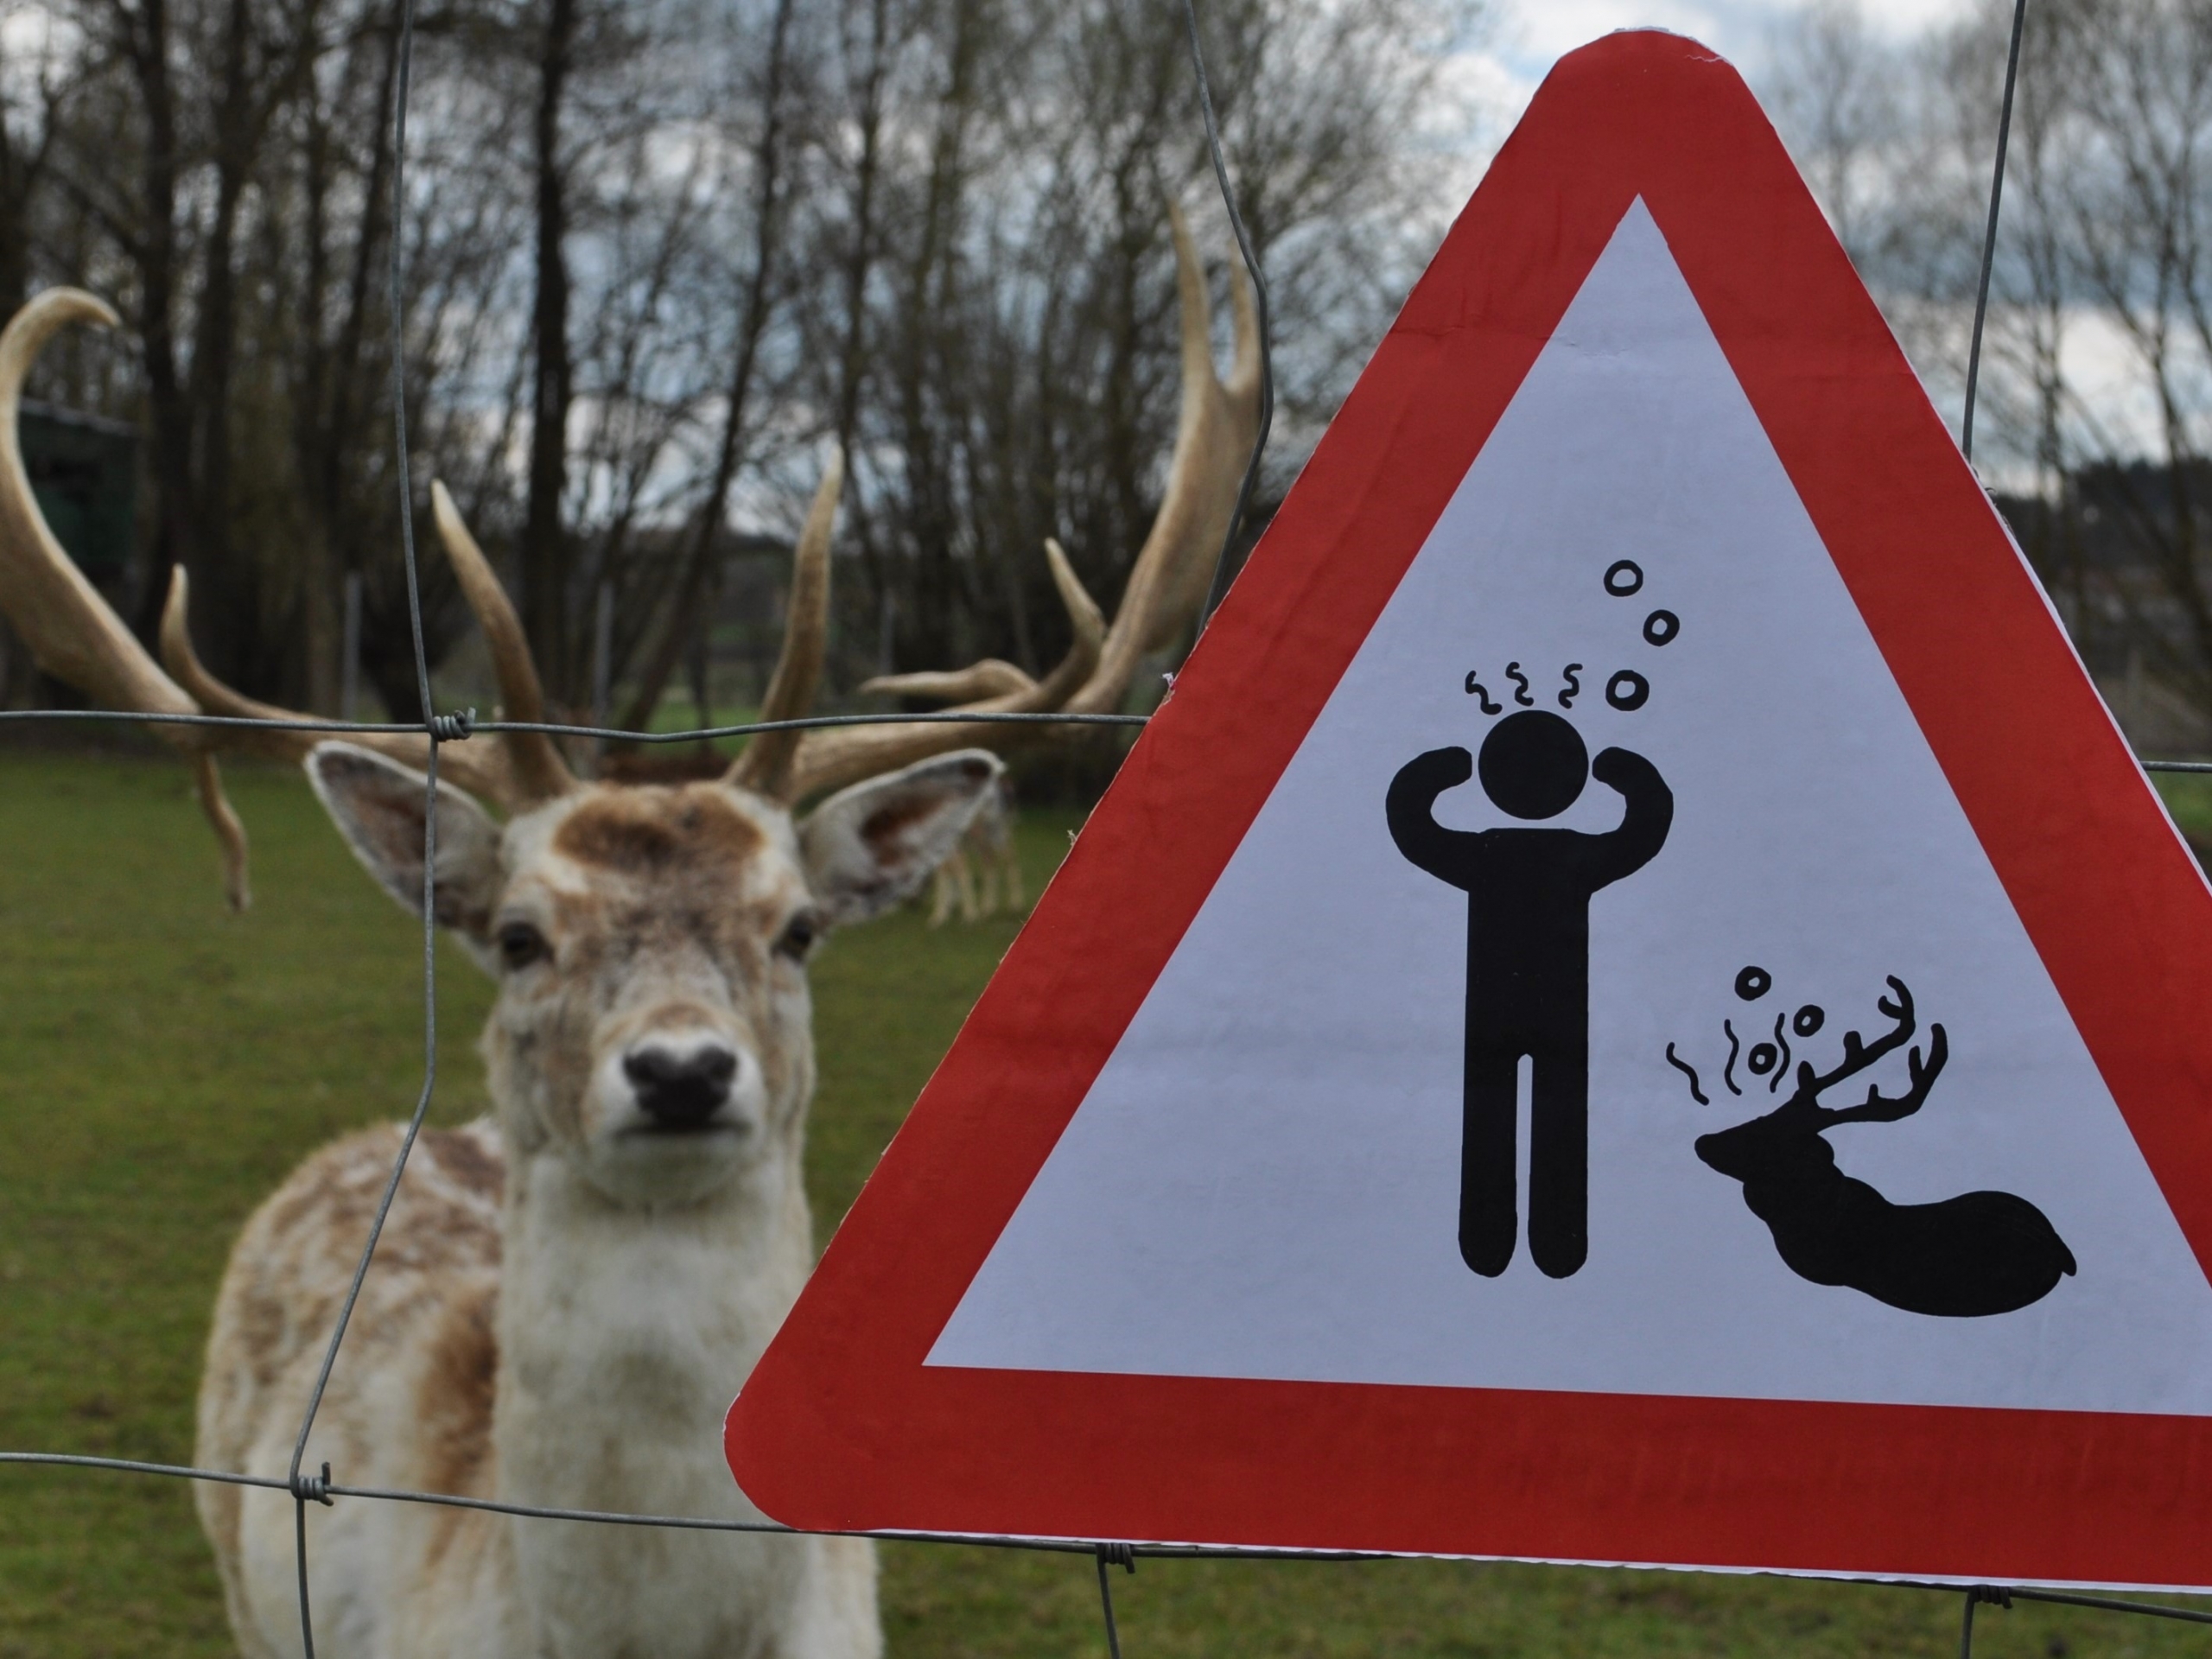 A warning sign saying that wild makes people sick and a deer with eye contact.